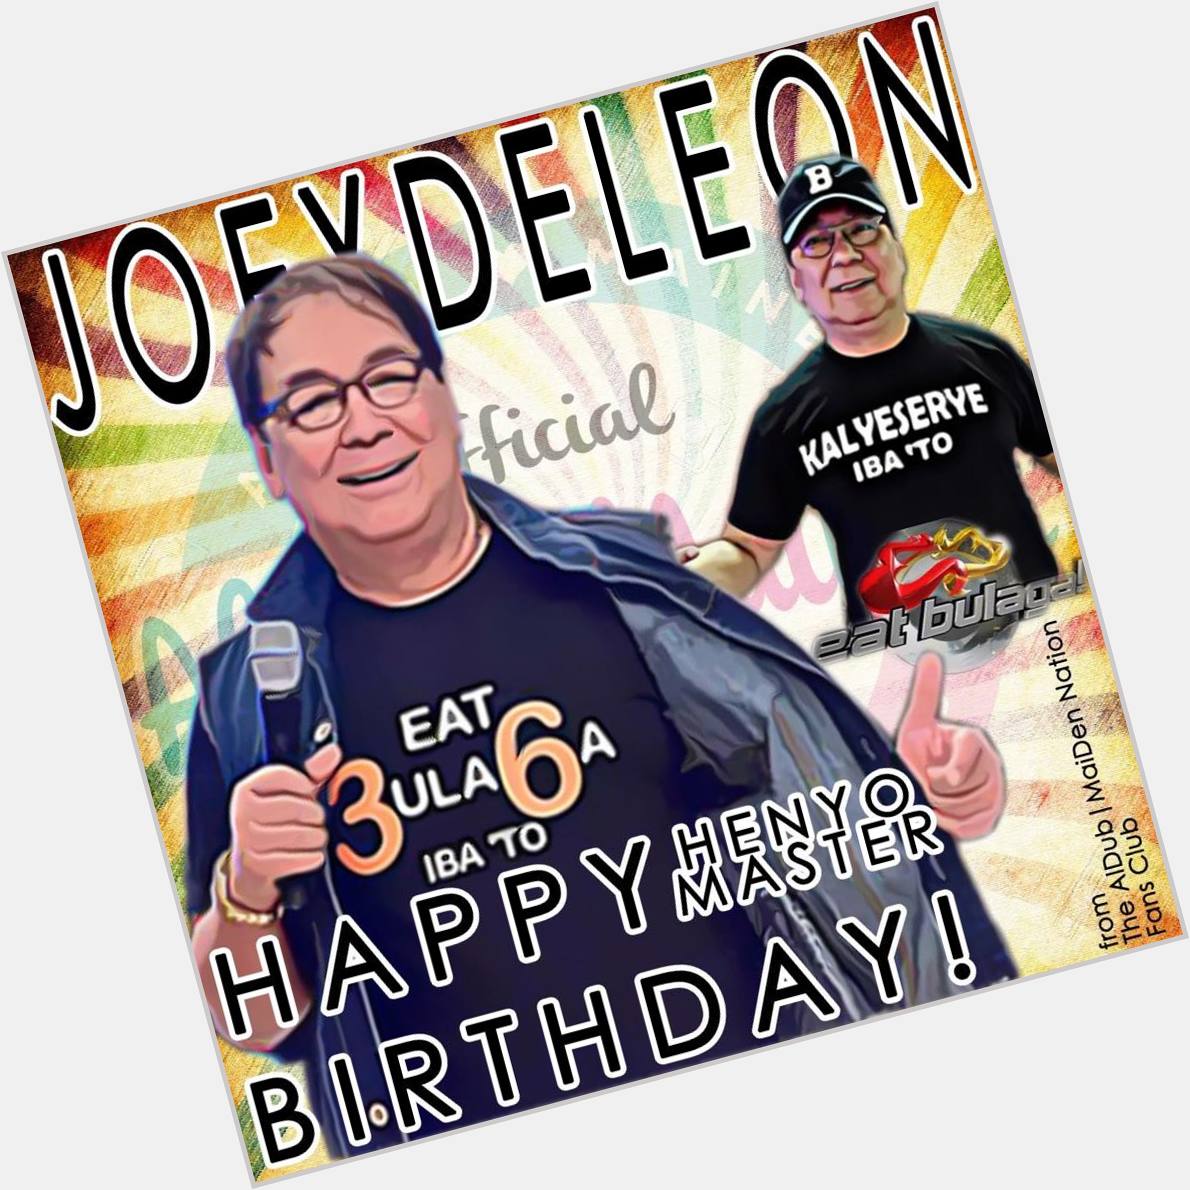 Happy birthday to one of dabarkads in eat bulaga our master henyo joey de leon... longlife and lot\s of blessing... 